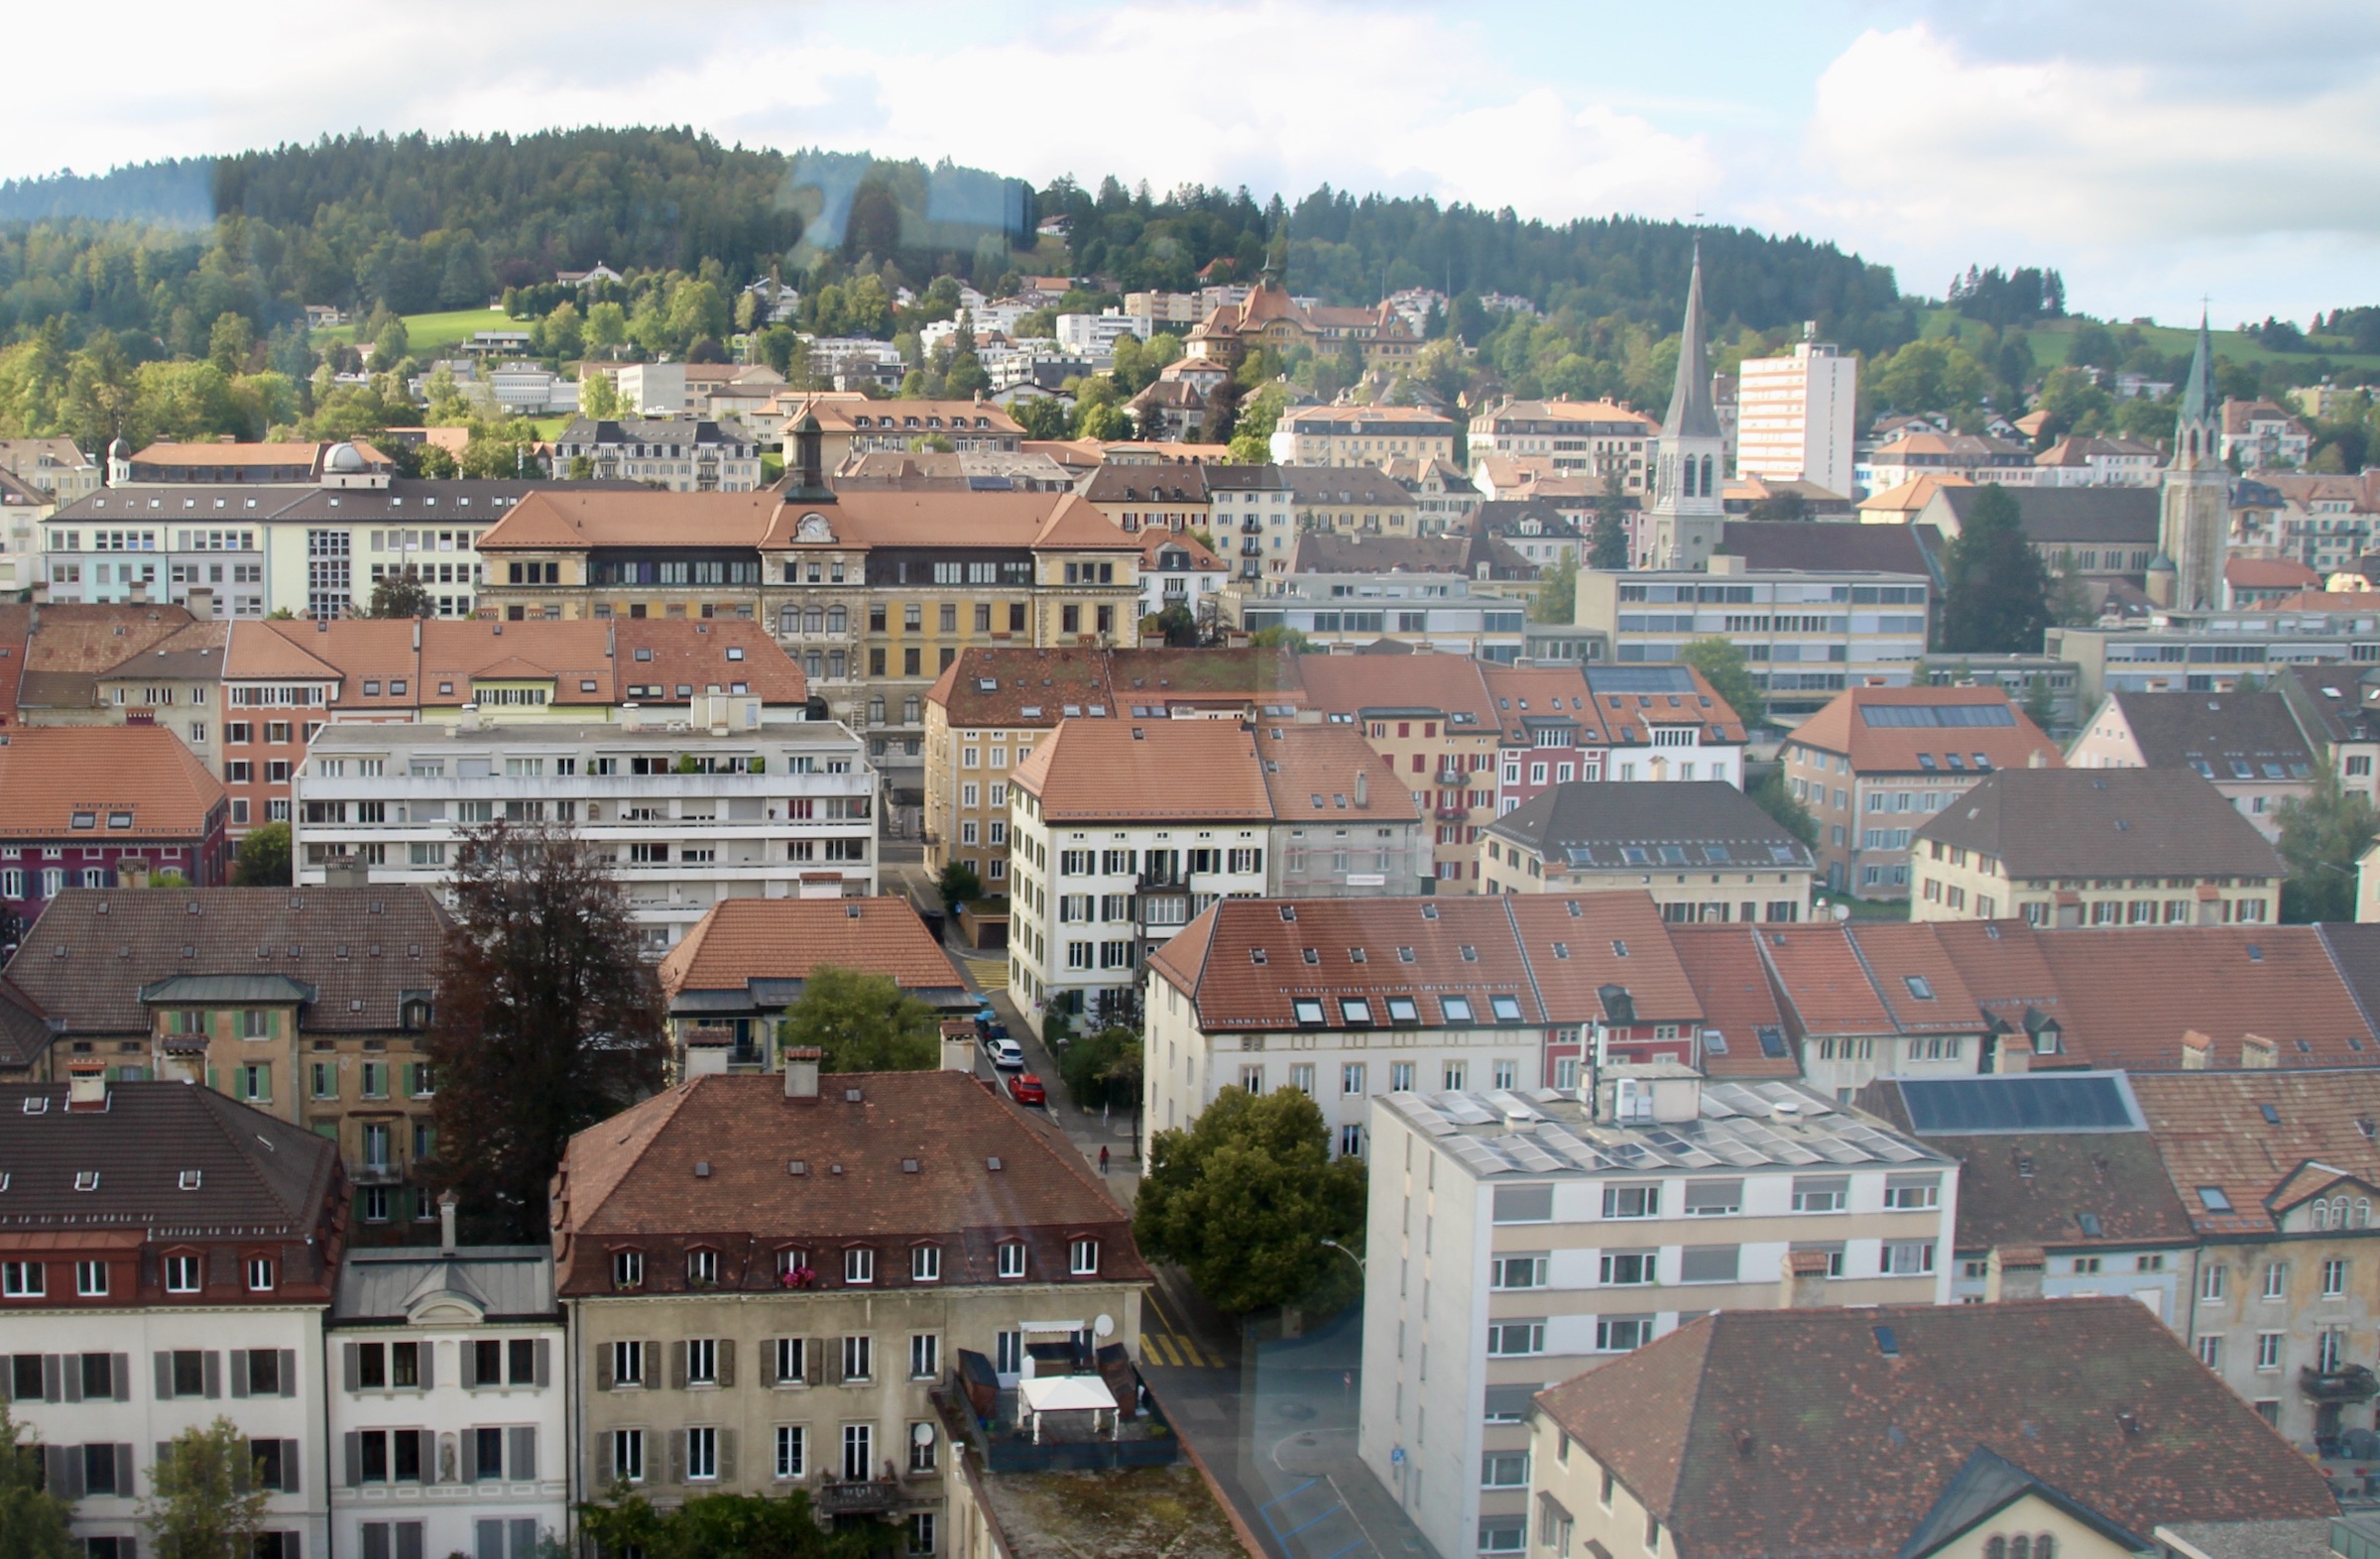 View of La Chaux-de-Fonds, the large library in the background